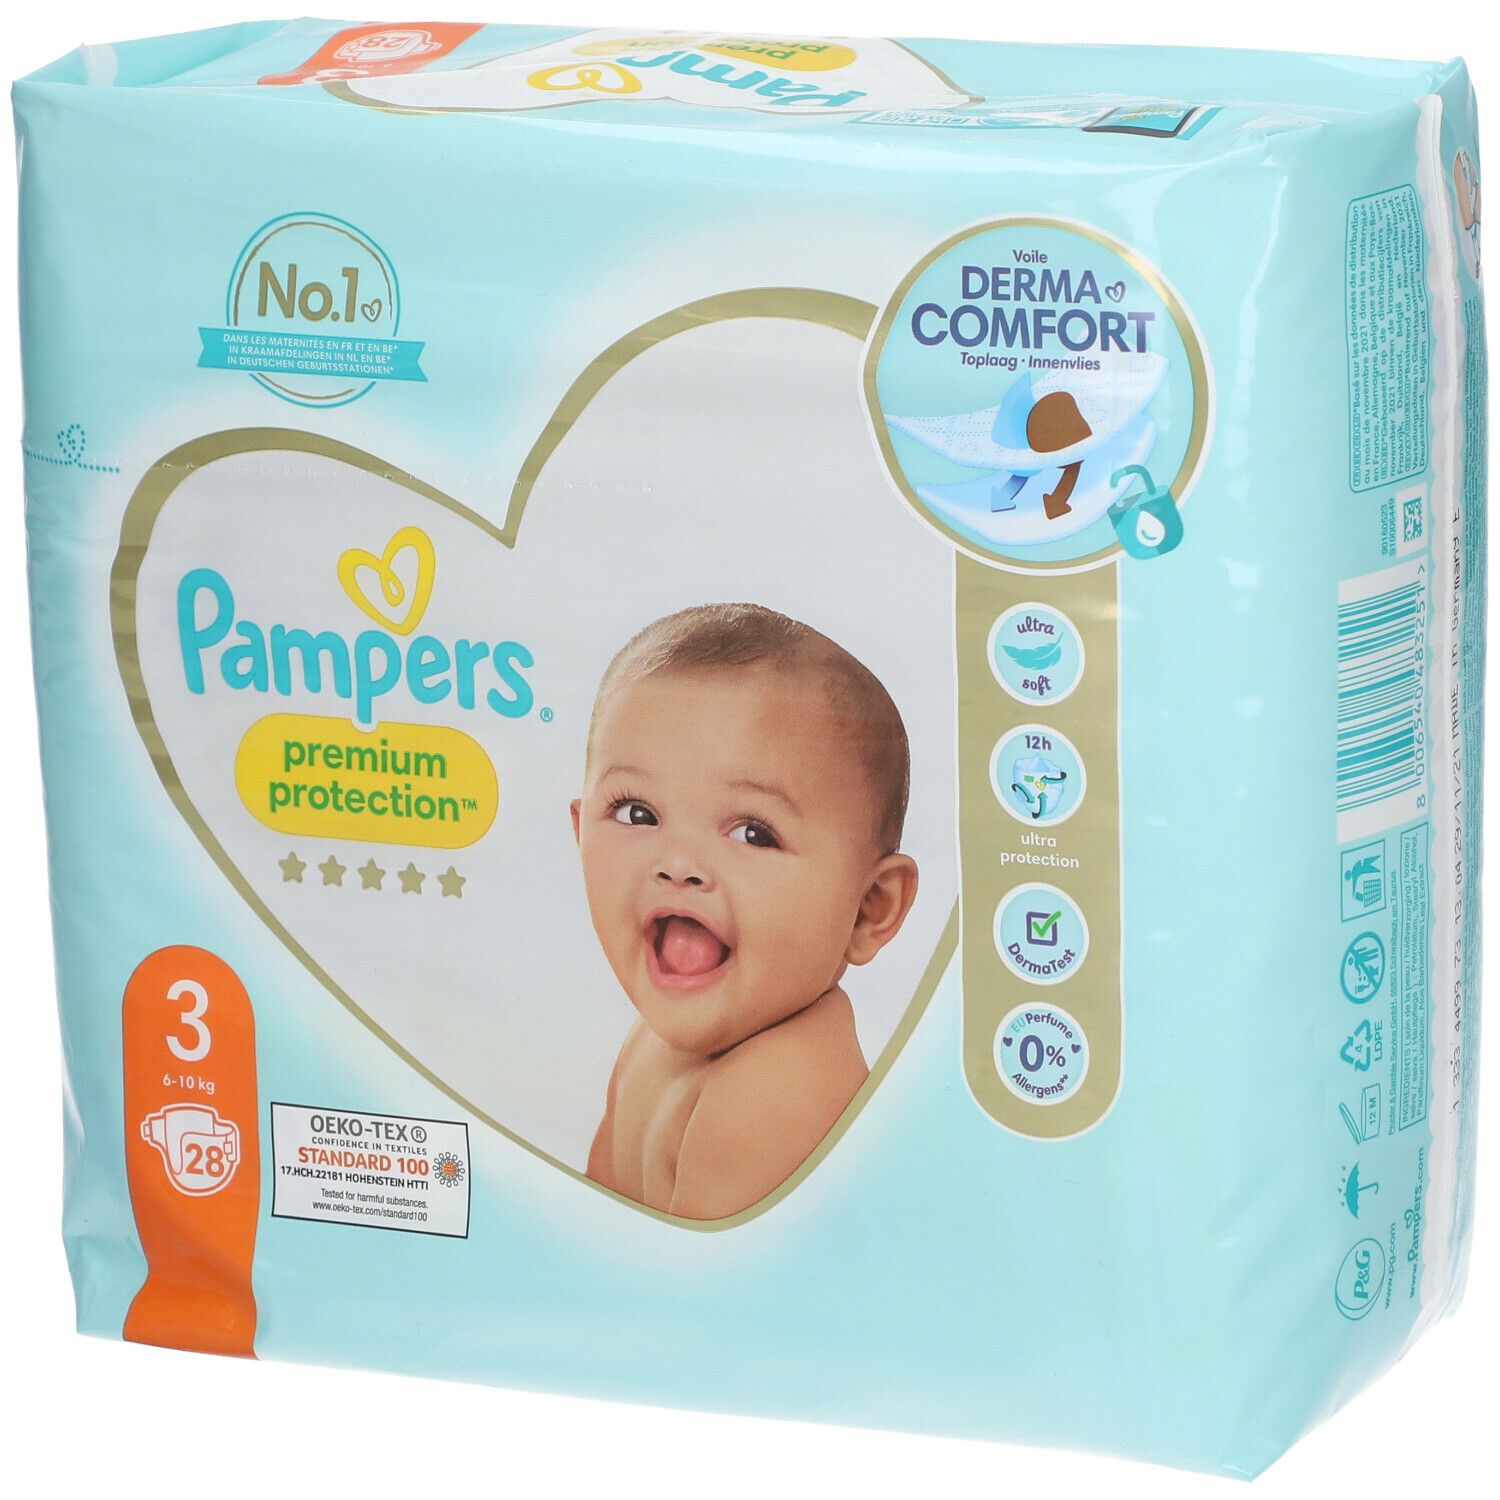 Pampers® Premium Protection™ Couche Taille 3, 6-10 kg